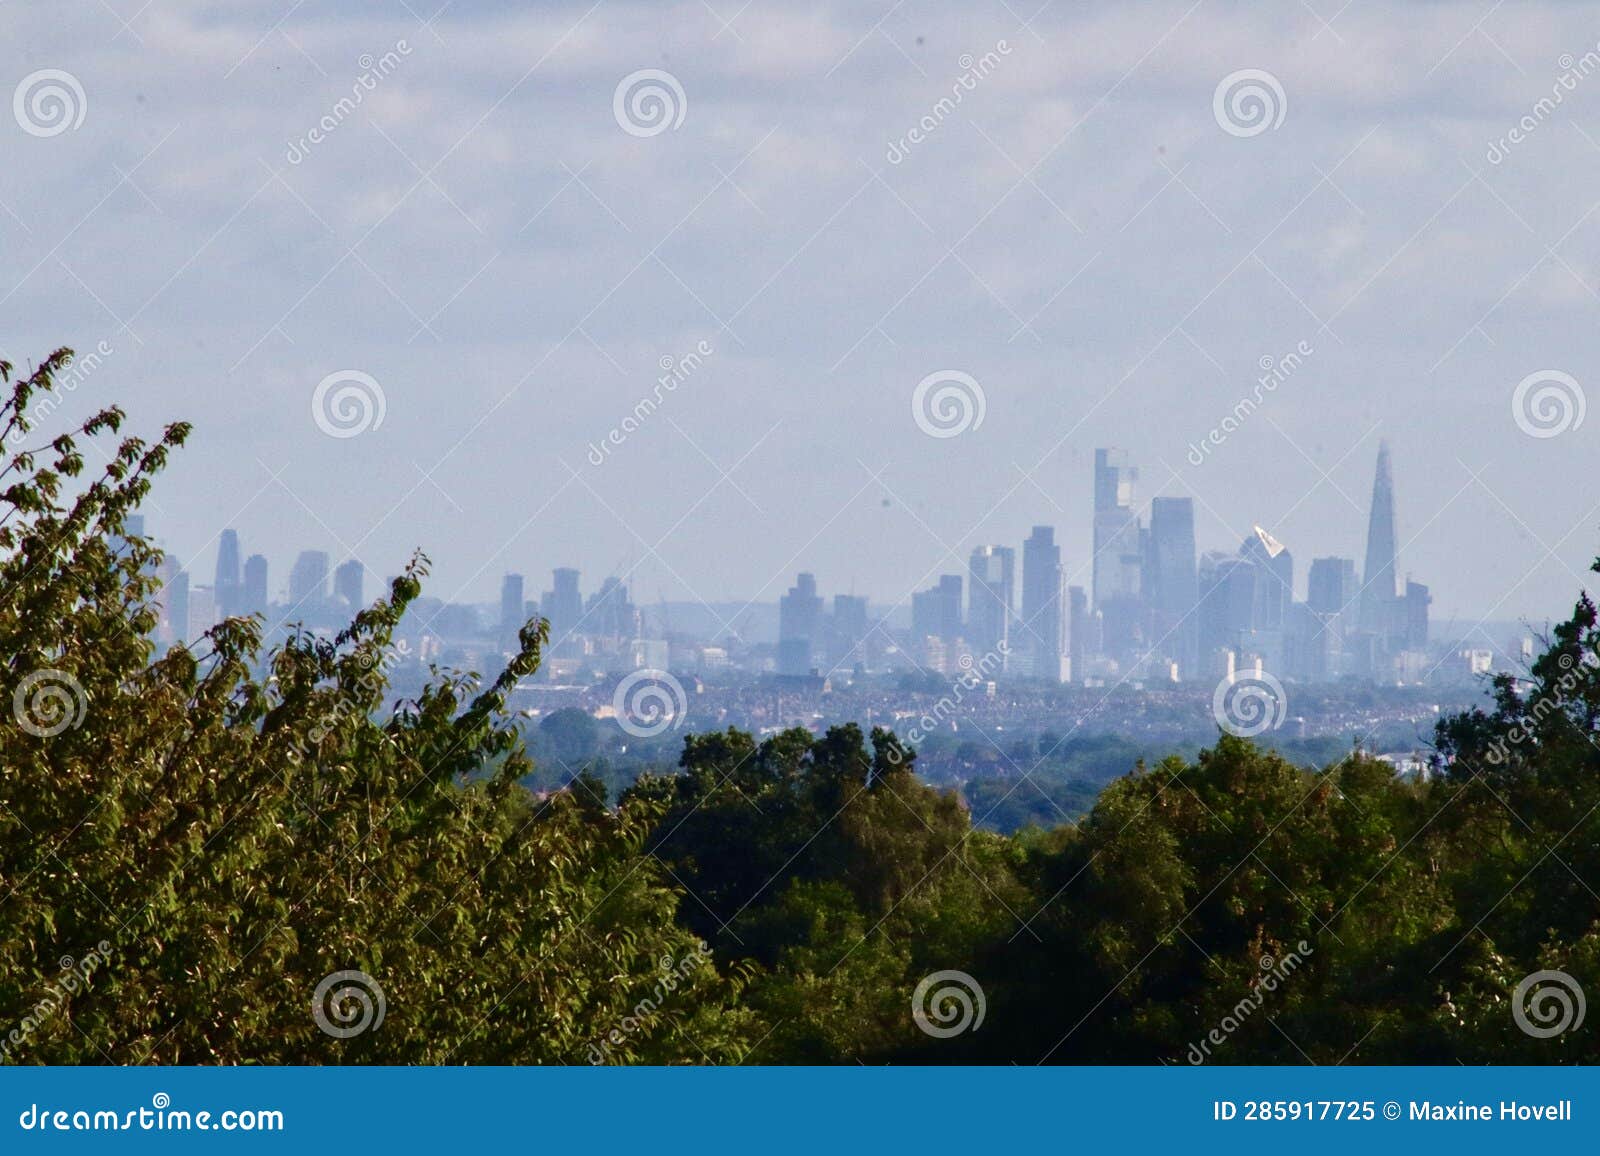 London Skyline from Epsom Downs Stock Image - Image of silhouette ...